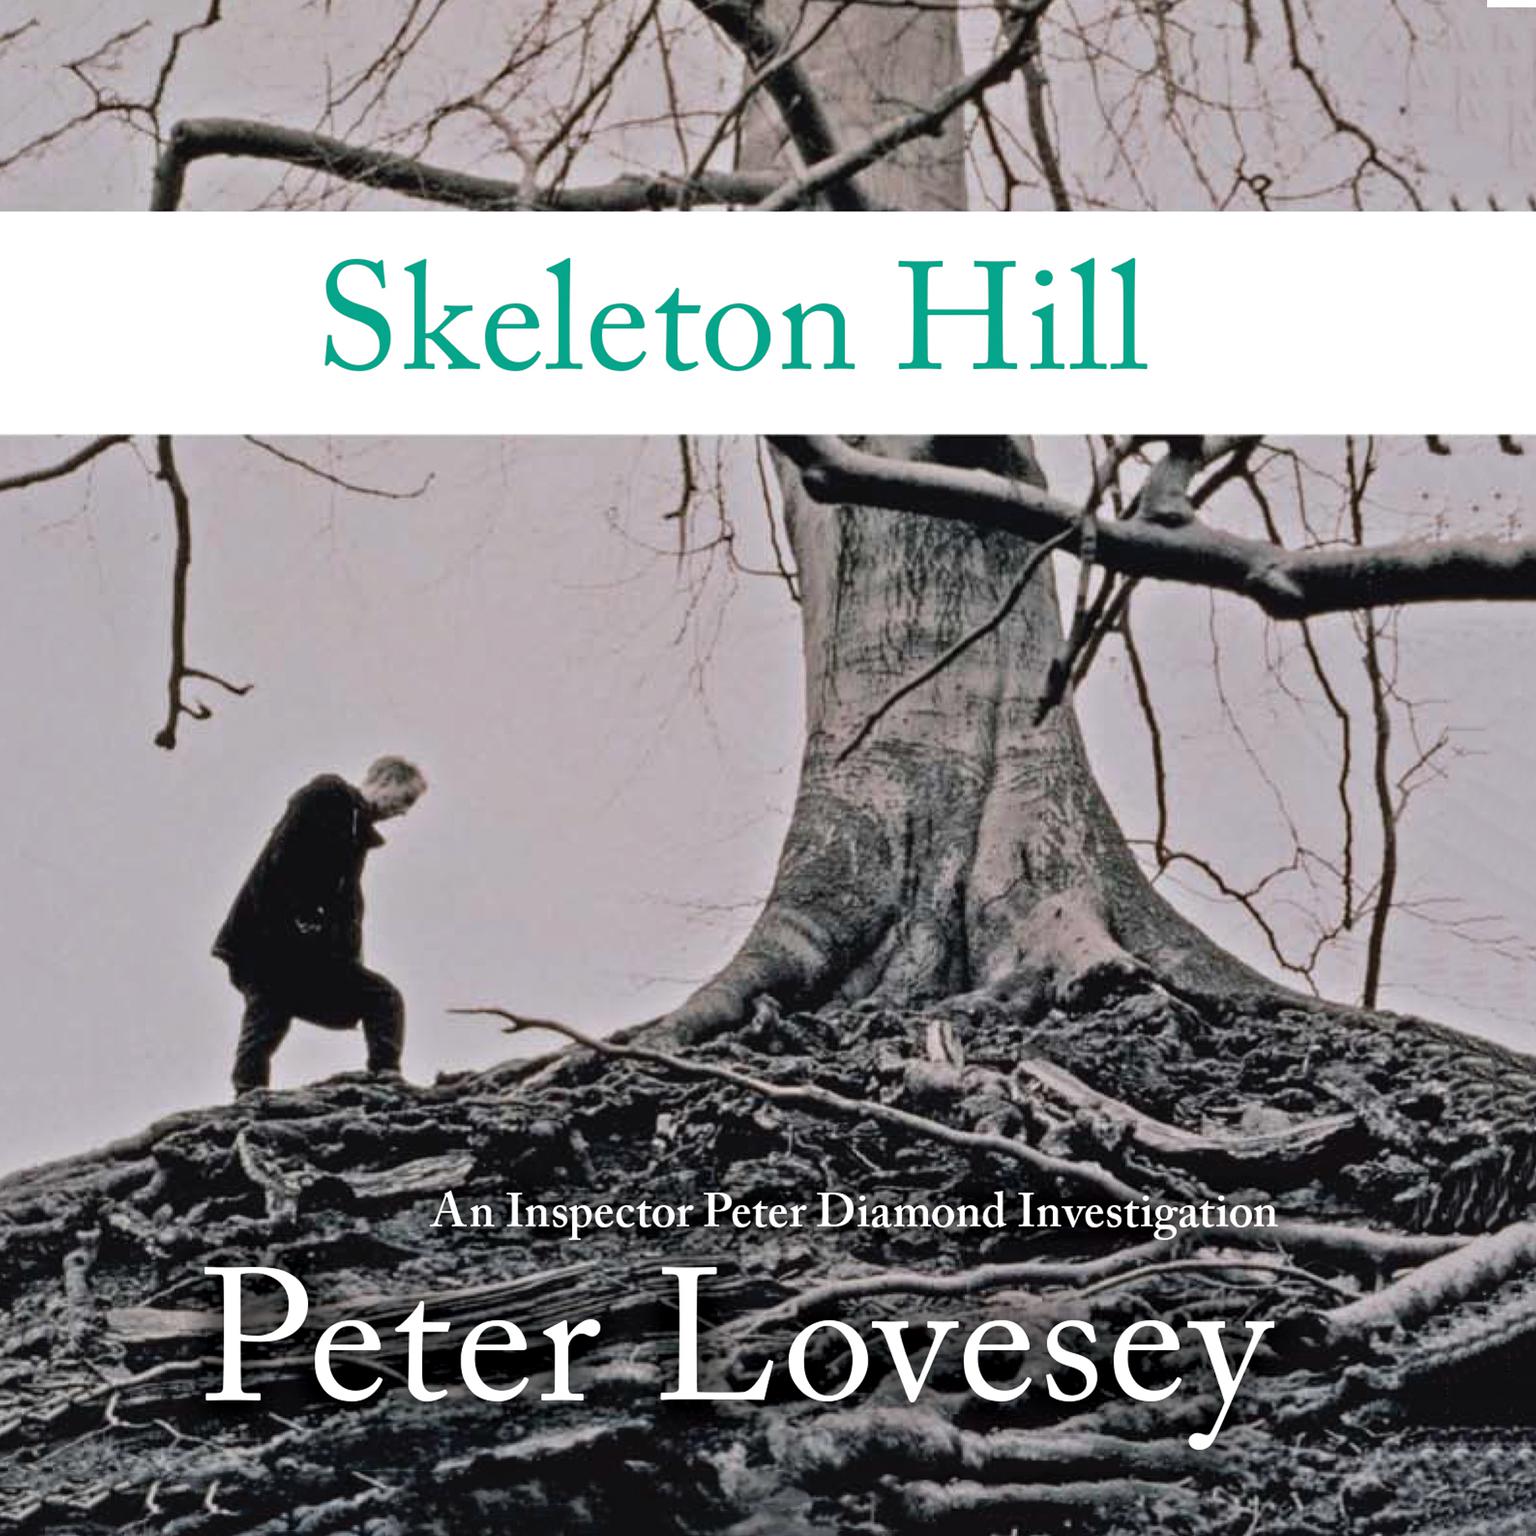 Skeleton Hill Audiobook, by Peter Lovesey